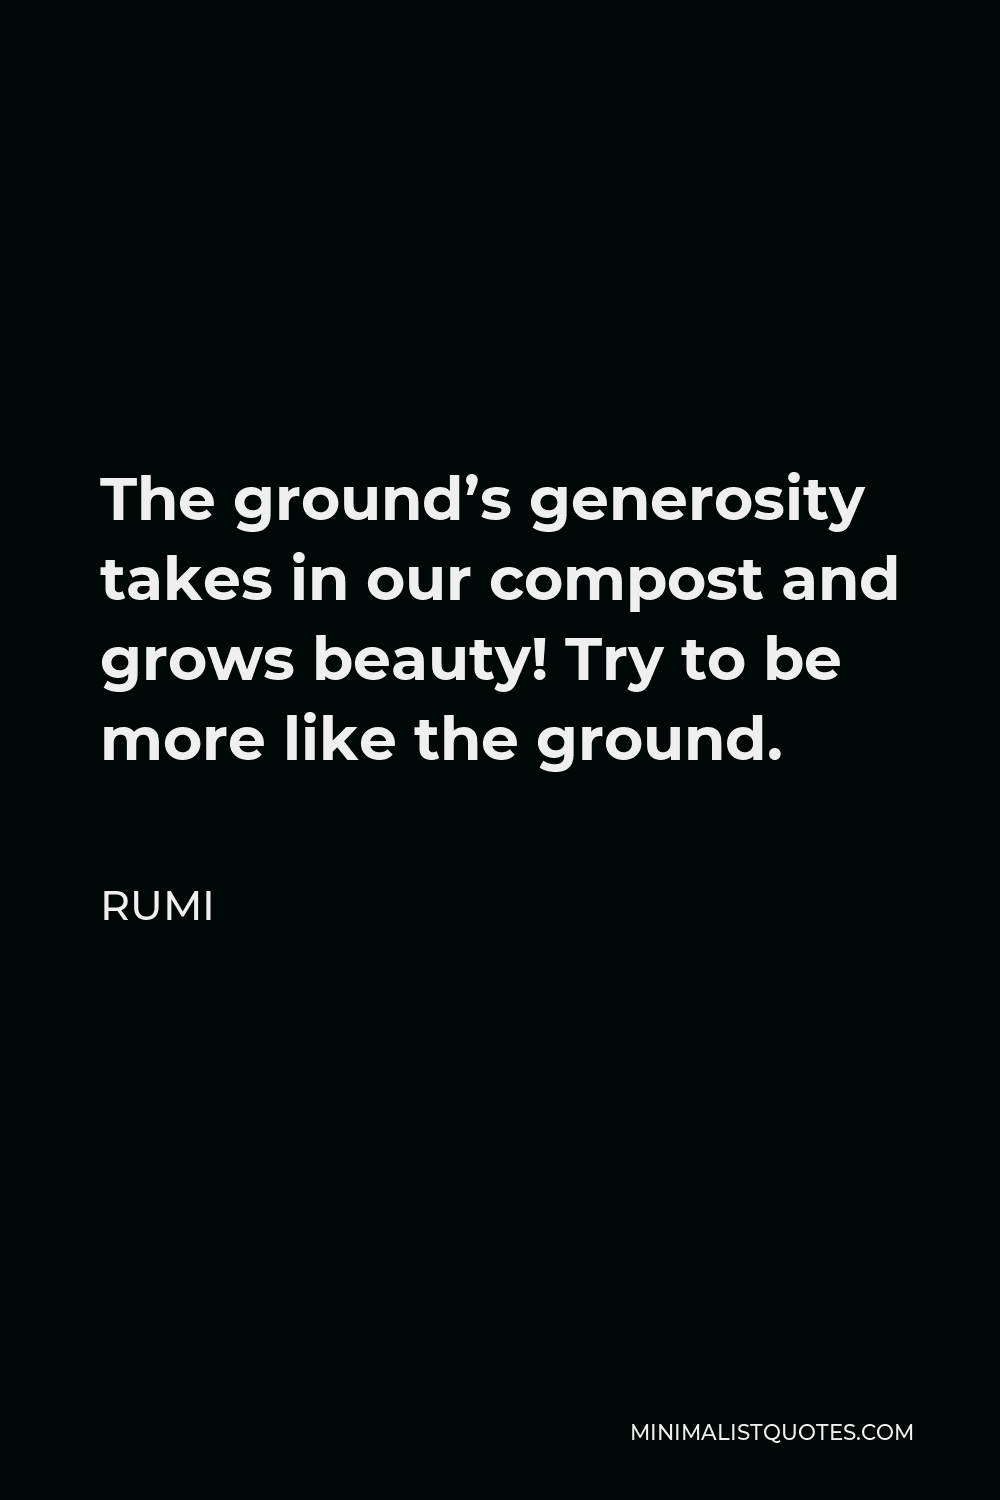 Rumi Quote - The ground’s generosity takes in our compost and grows beauty! Try to be more like the ground.